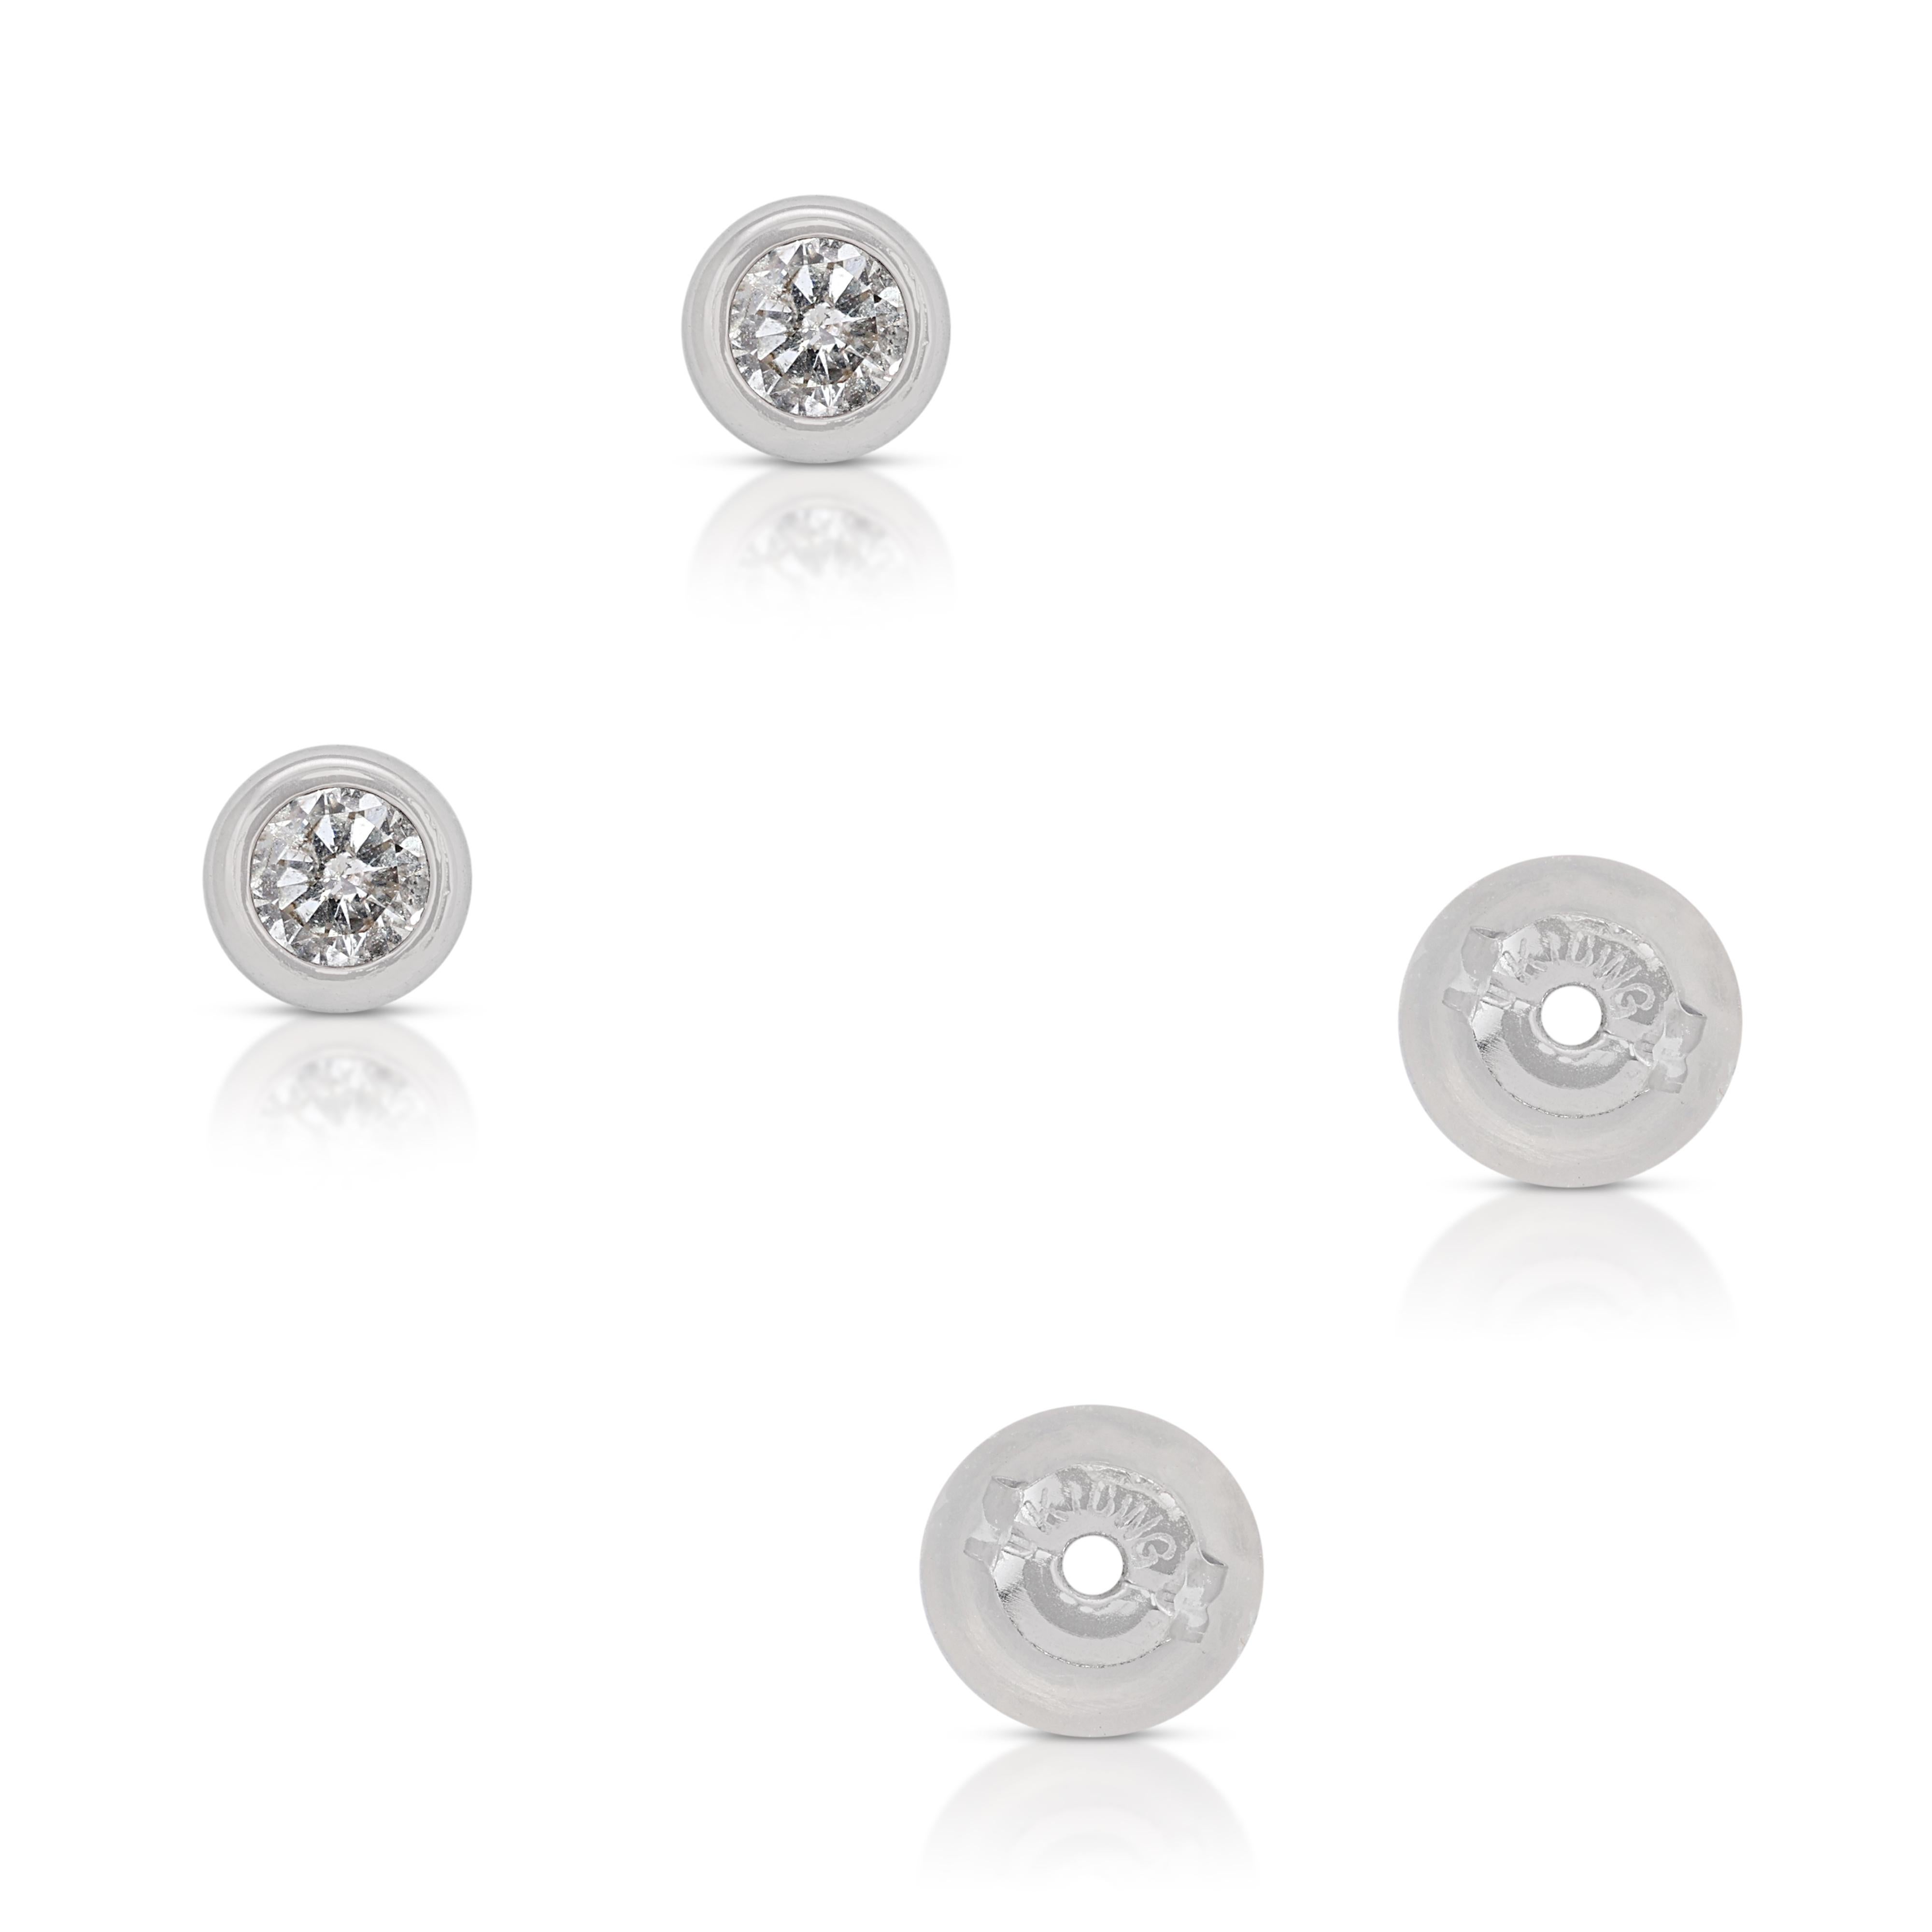 Exquisite 0.14ct Diamond Stud Earrings in 10K White Gold For Sale 2